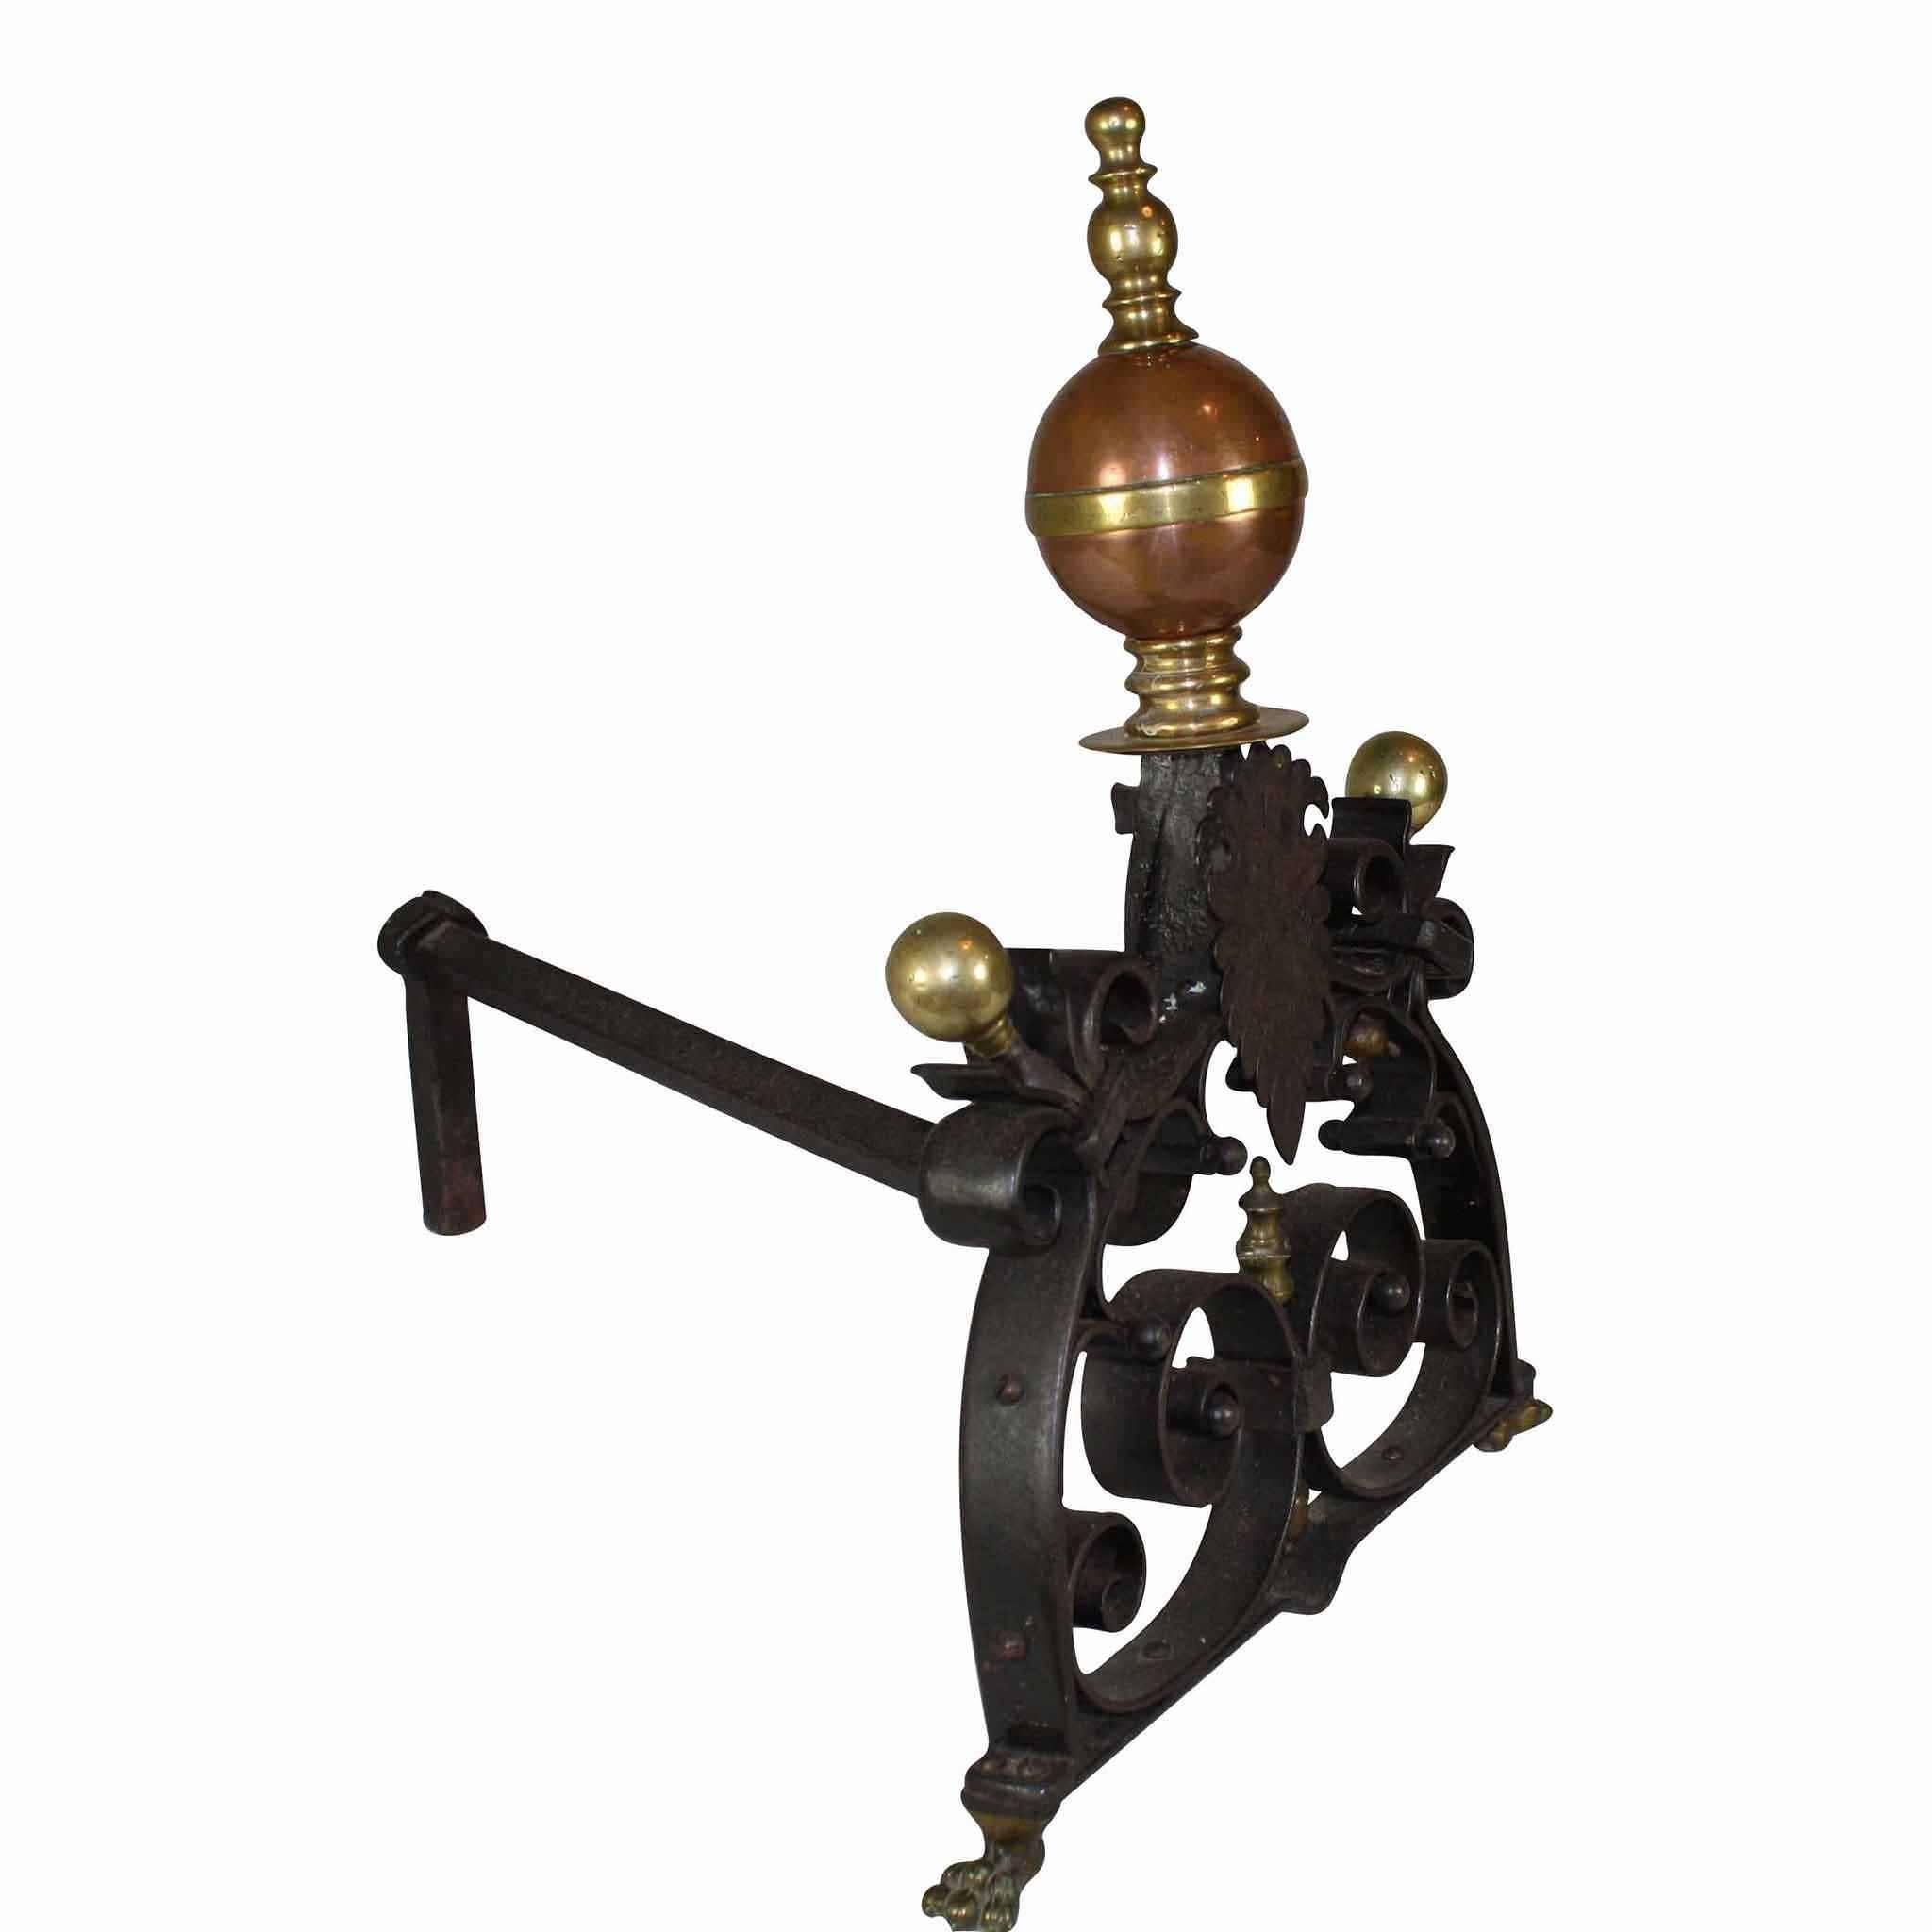 Lovely scrolled iron work gives rise to brass globe finials, the larger center finial features contrasting copper with brass accents, all supported by brass claw feet. These are fully functional andirons and have shanks of 20 inches long.